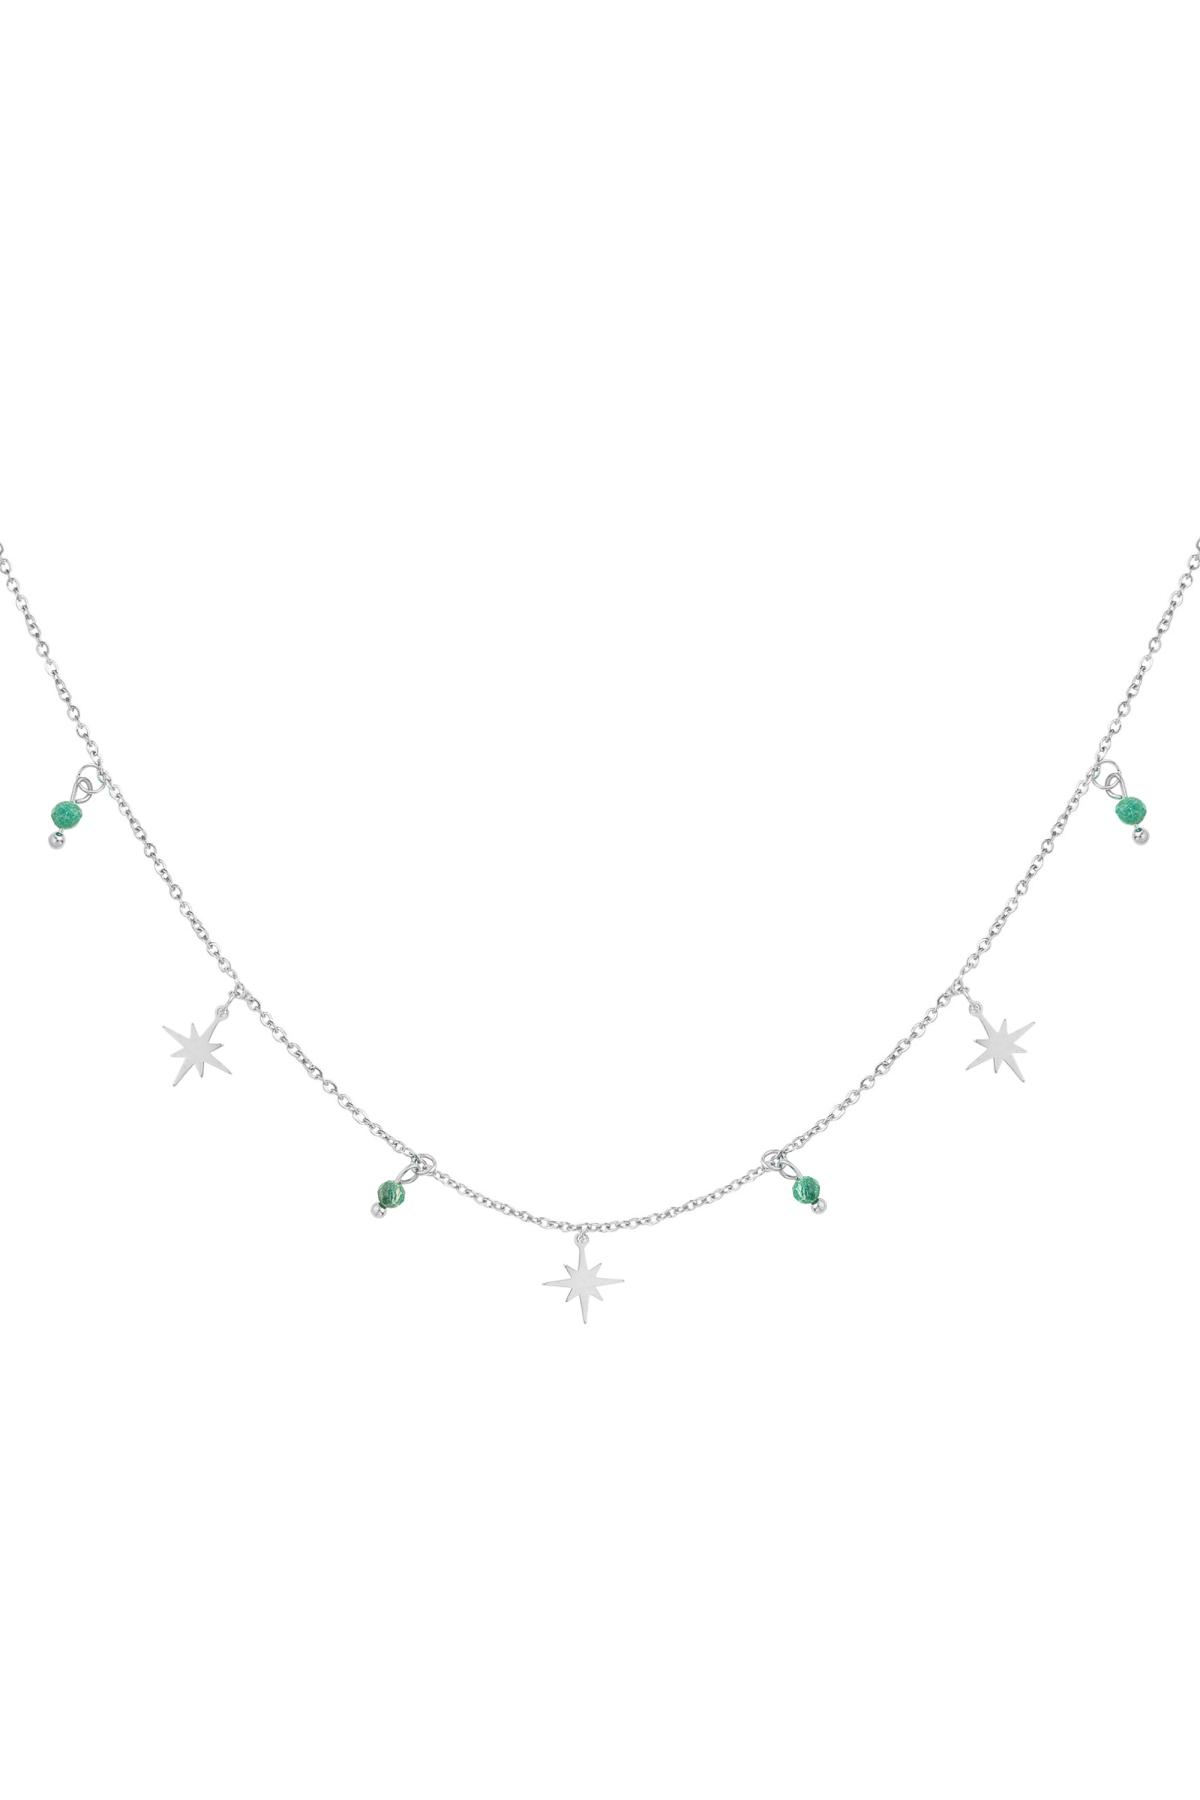 North star necklace &amp; beads Silver Stainless Steel